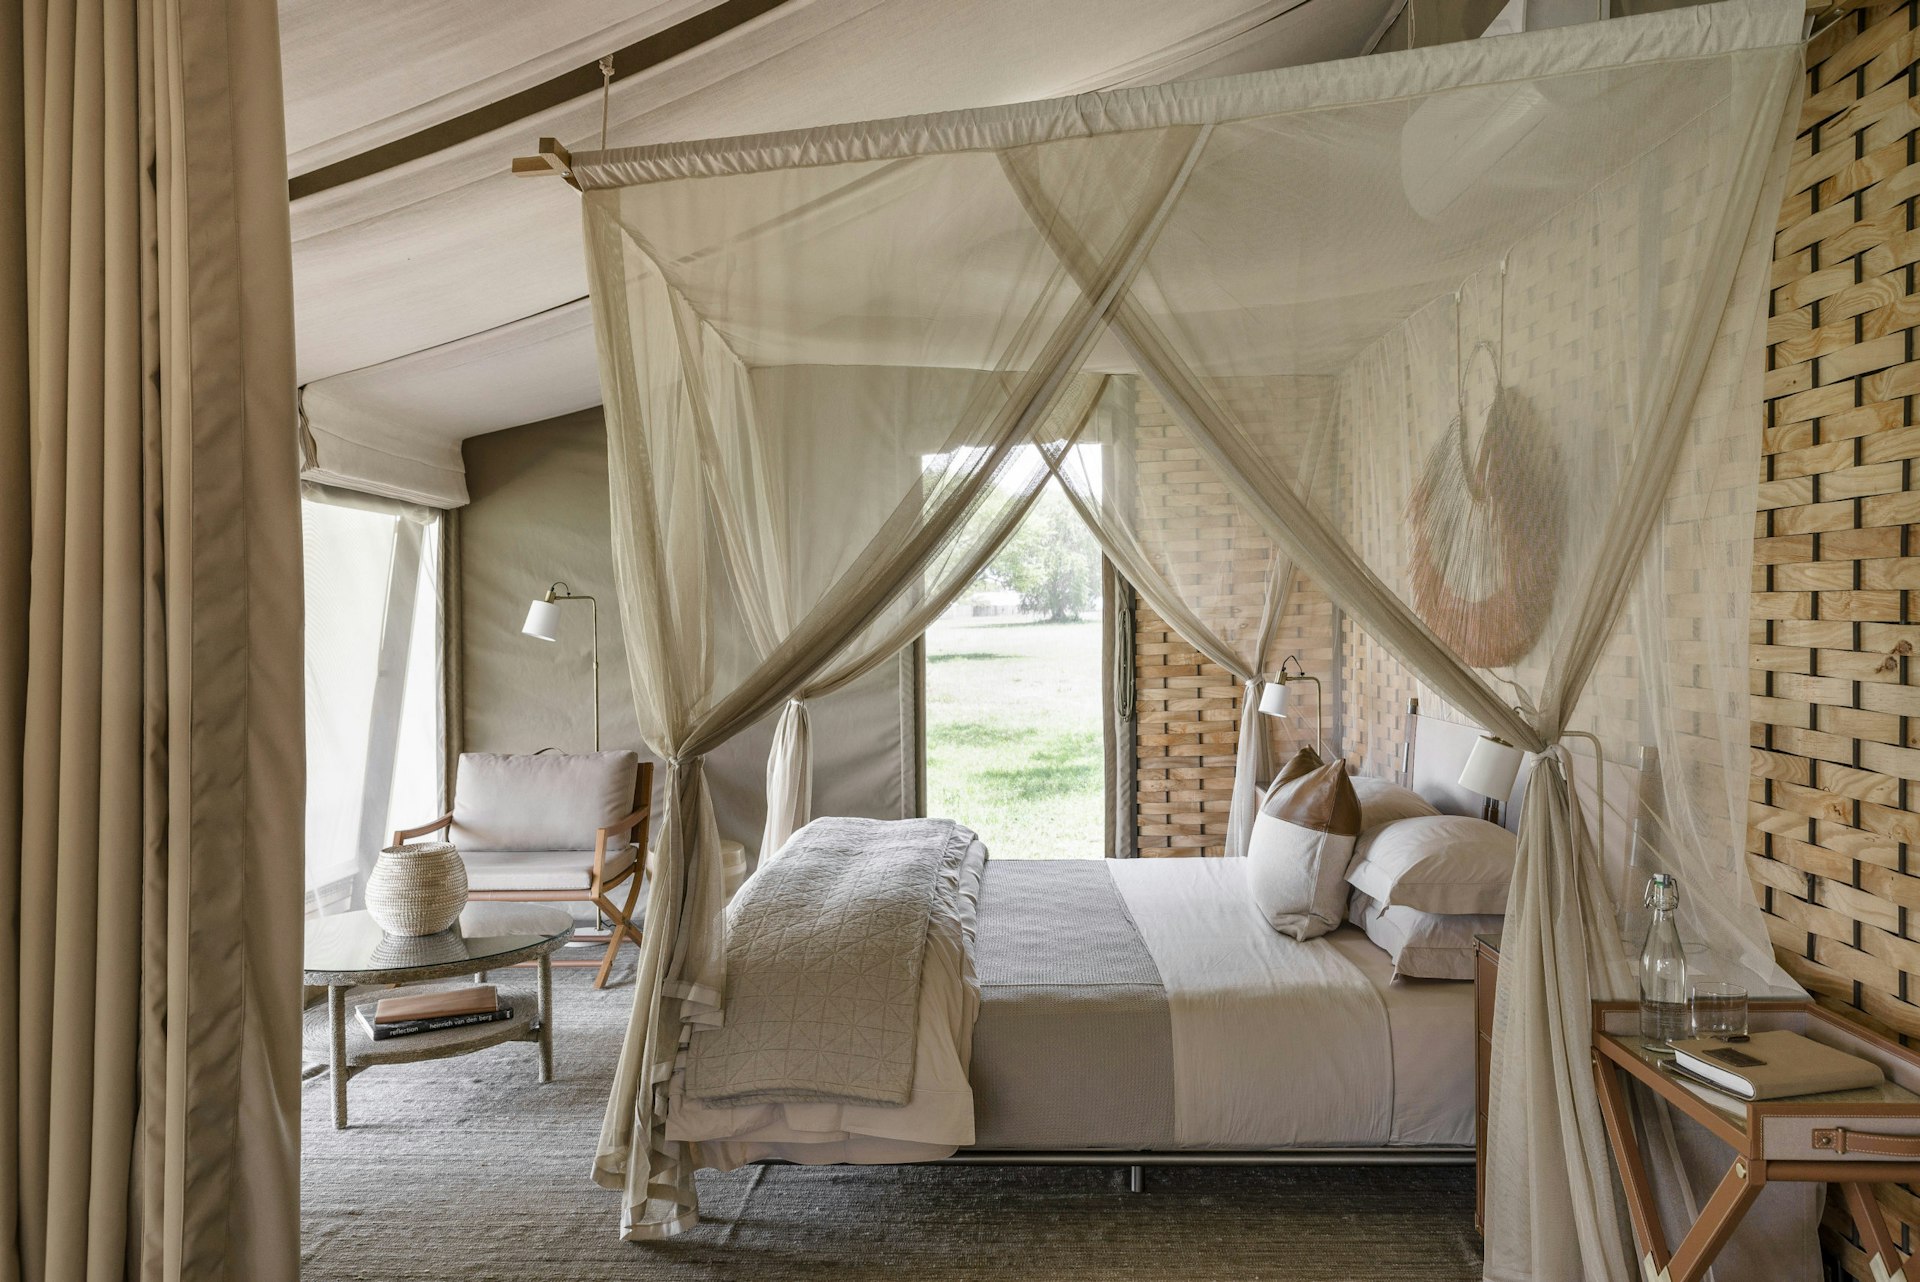 A tented safari lodge bedroom with sheer draperies surrounding the bed